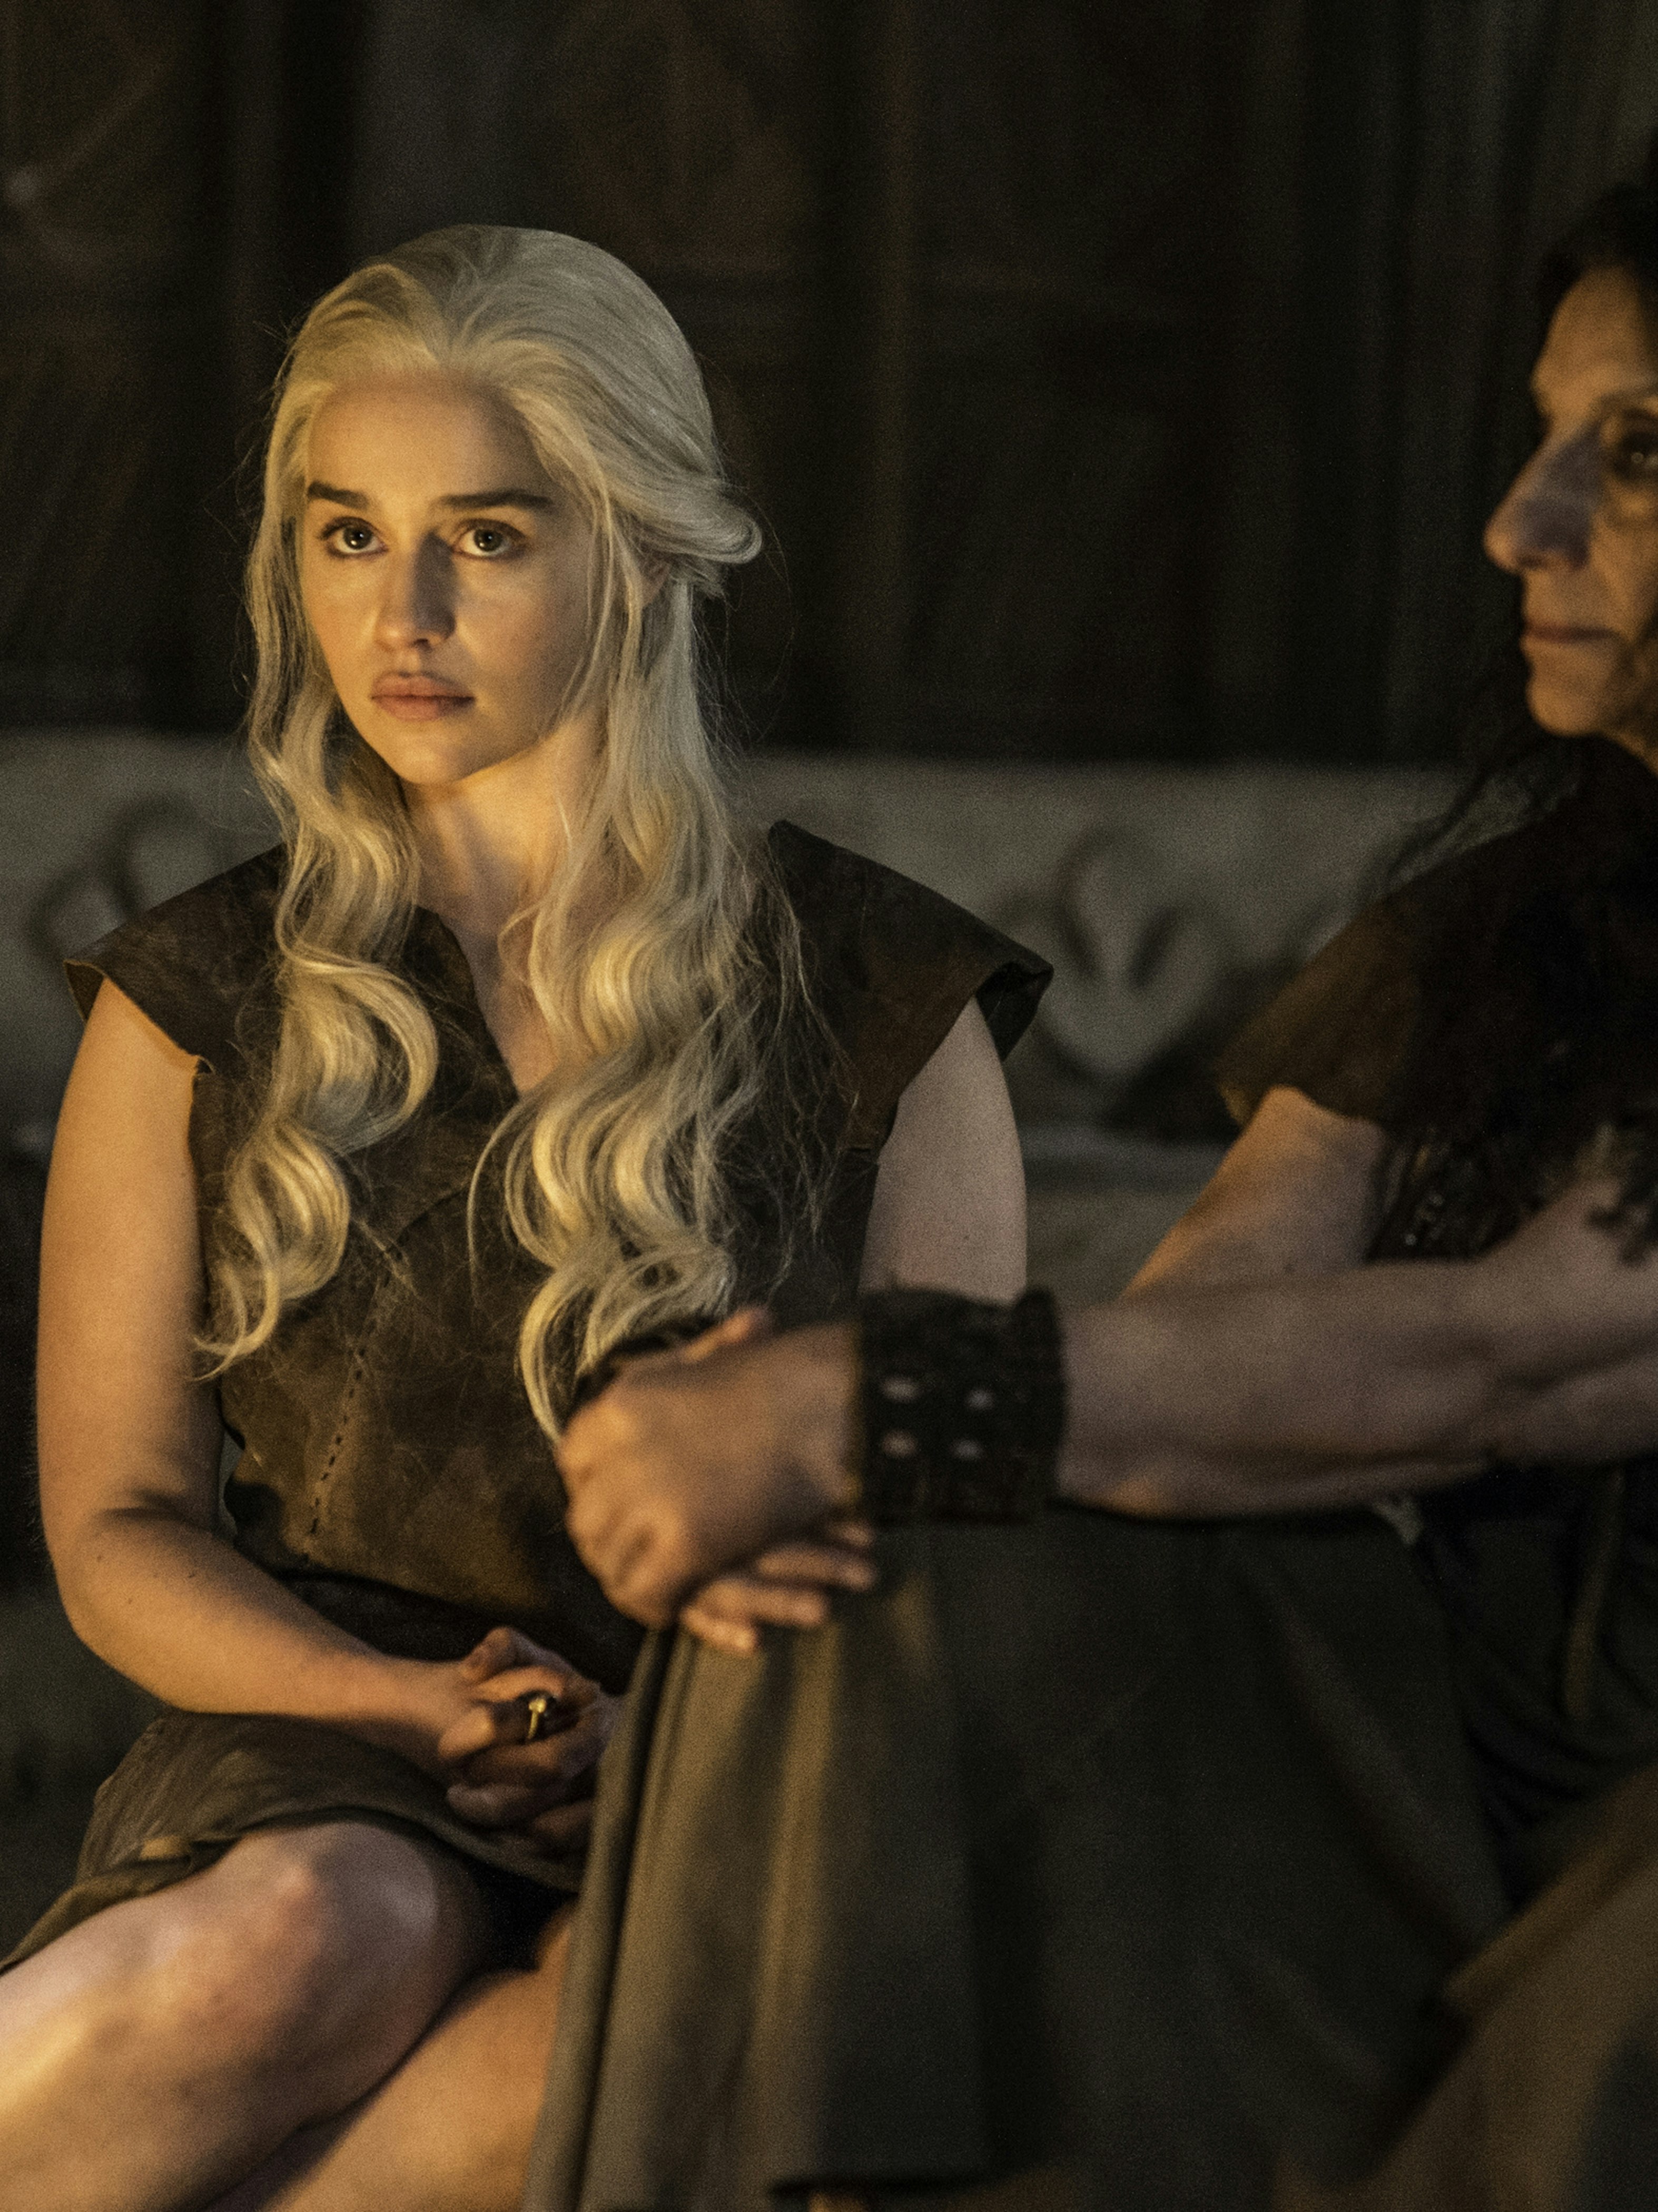 Why Daenerys S Fire Scene Was A Misstep For Game Of Thrones Inverse